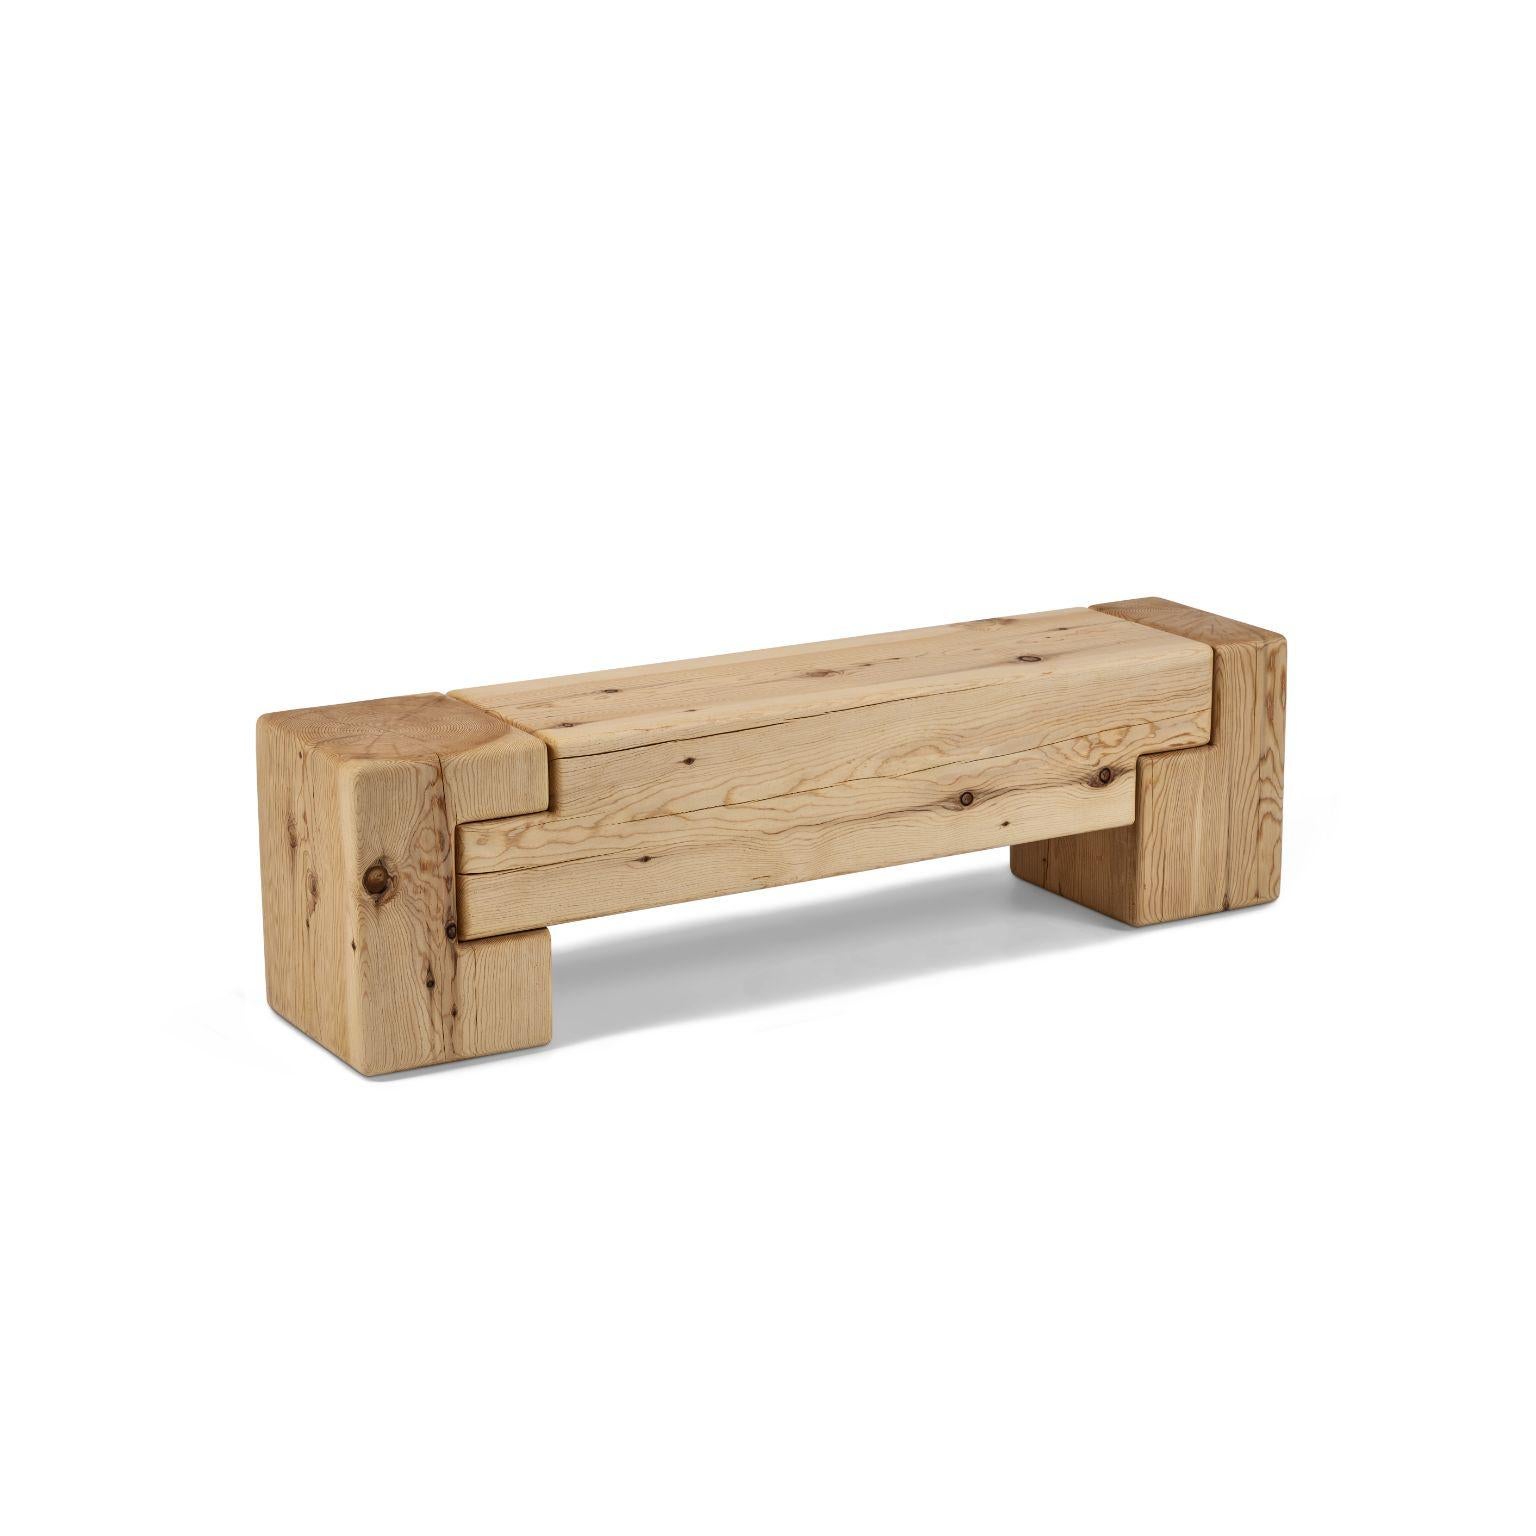 Turkish Aromatique Cedre Monoblock Bench by Contemporary Ecowood For Sale